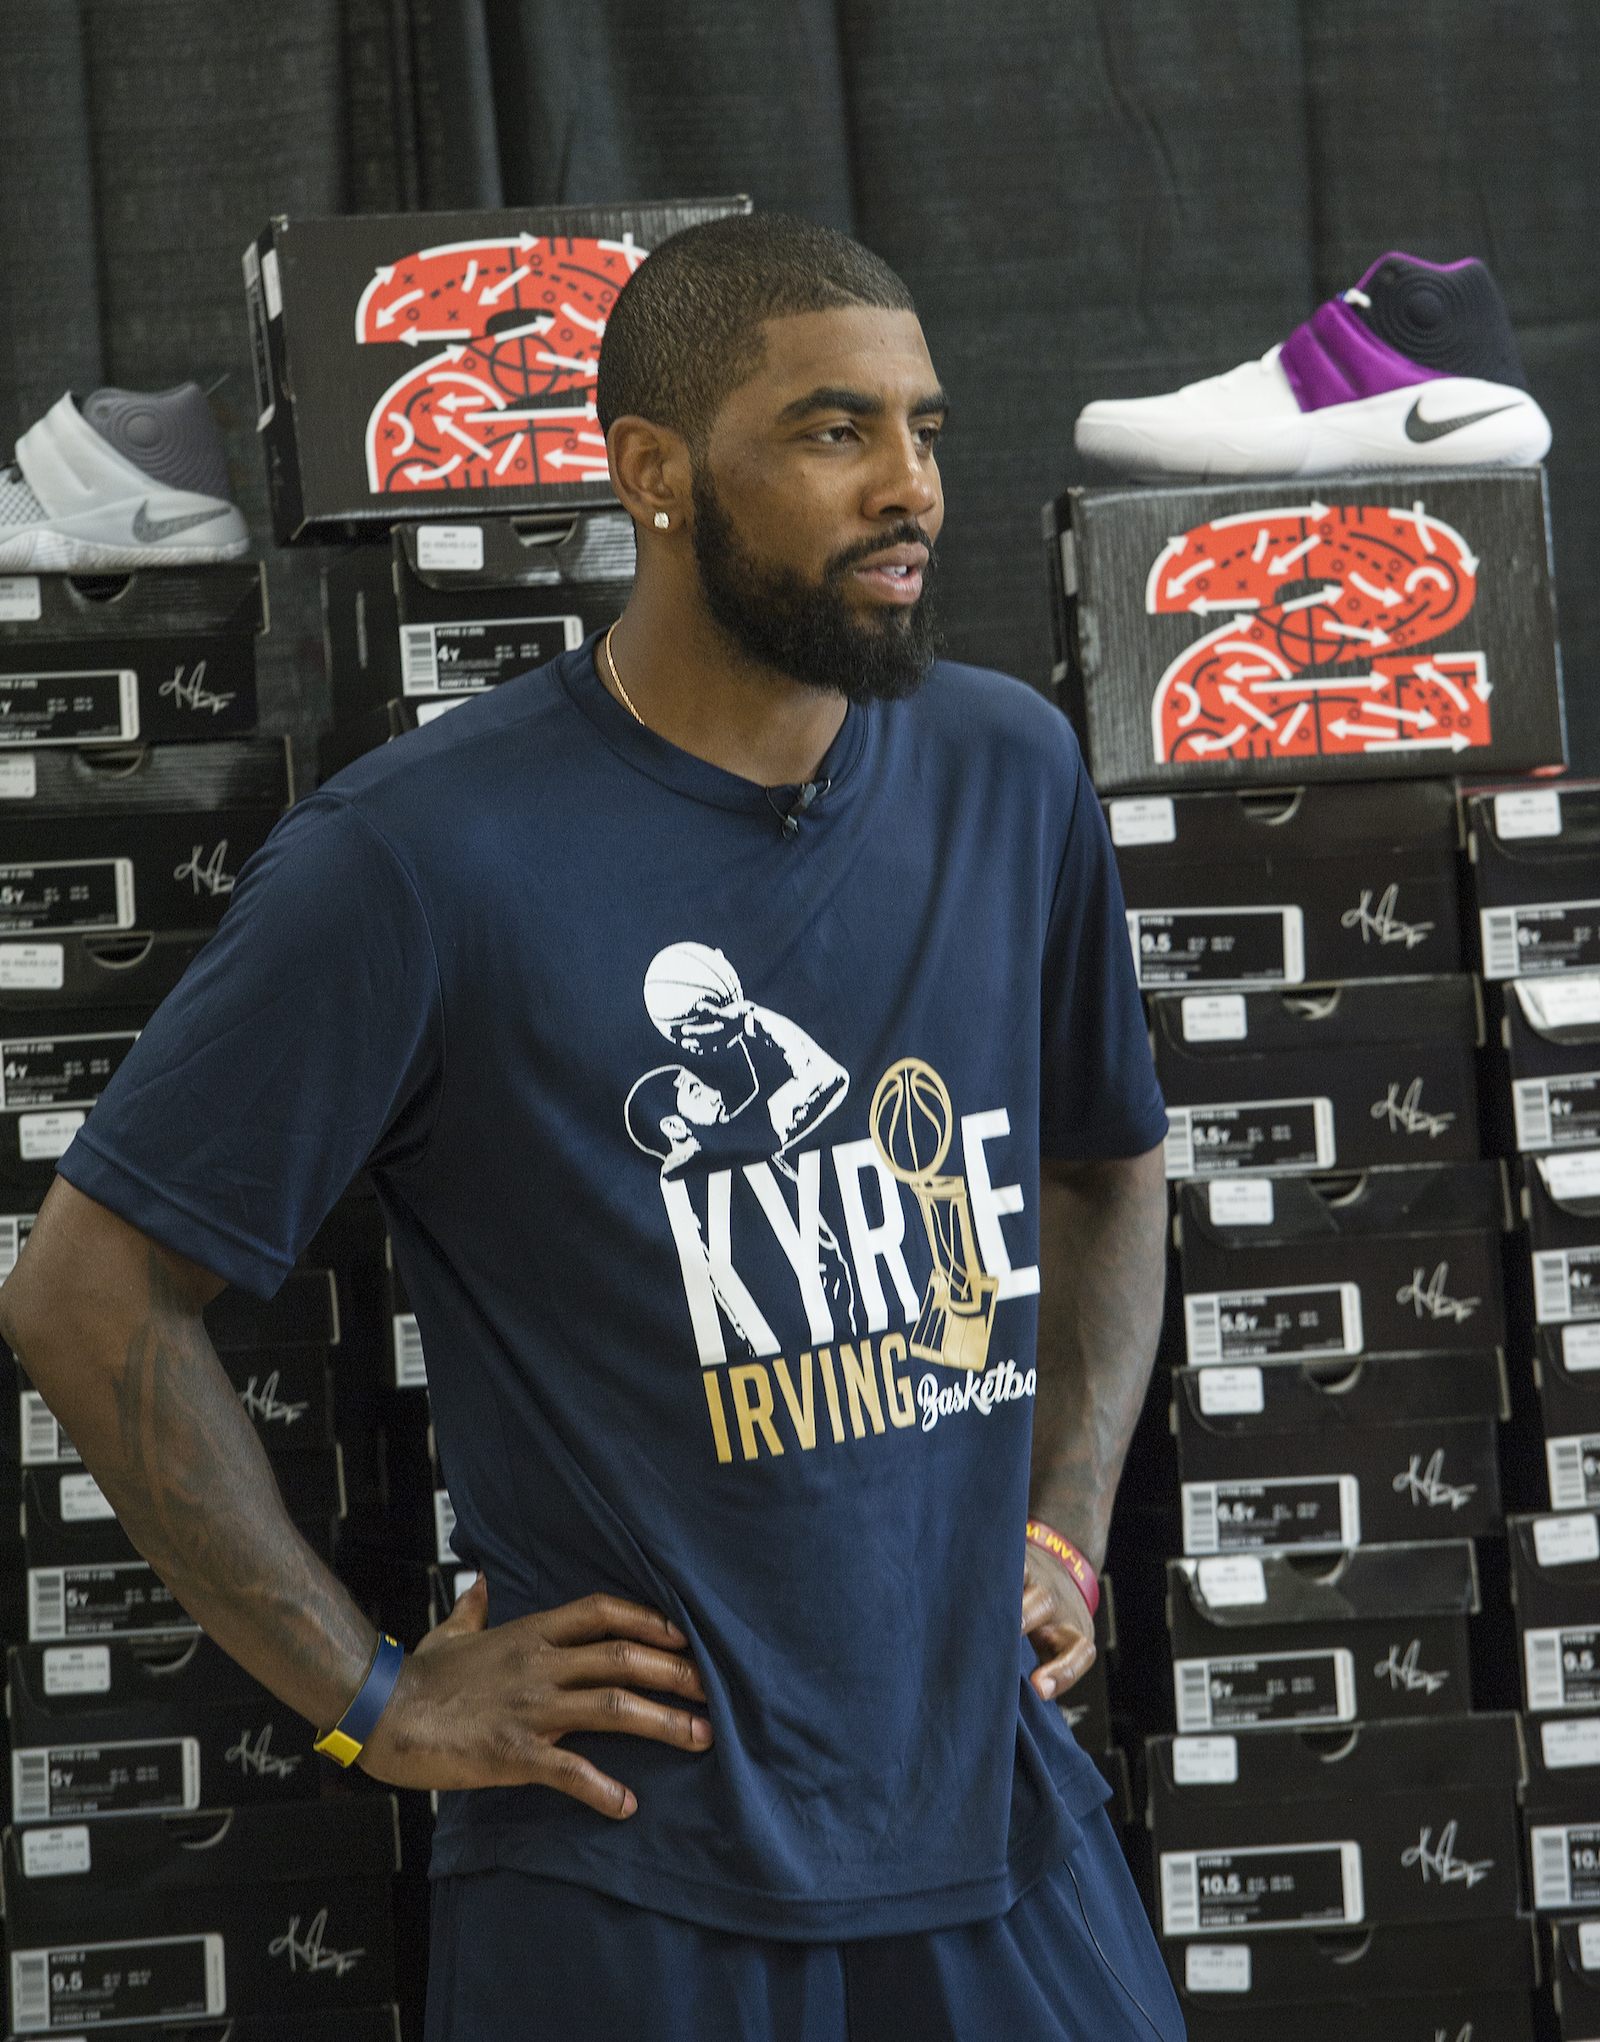 Cleveland Cavaliers star Kyrie Irving, in partnership with Kids Foot Locker, donated 190 pairs of sneakers to Boys & Girls Clubs of Cleveland, Saturday, July 9, 2016, in Independence, Ohio. The donation matched Irving's 190 points scored during the NBA championship series.  (Phil Long/AP Images for Kids Foot Locker)